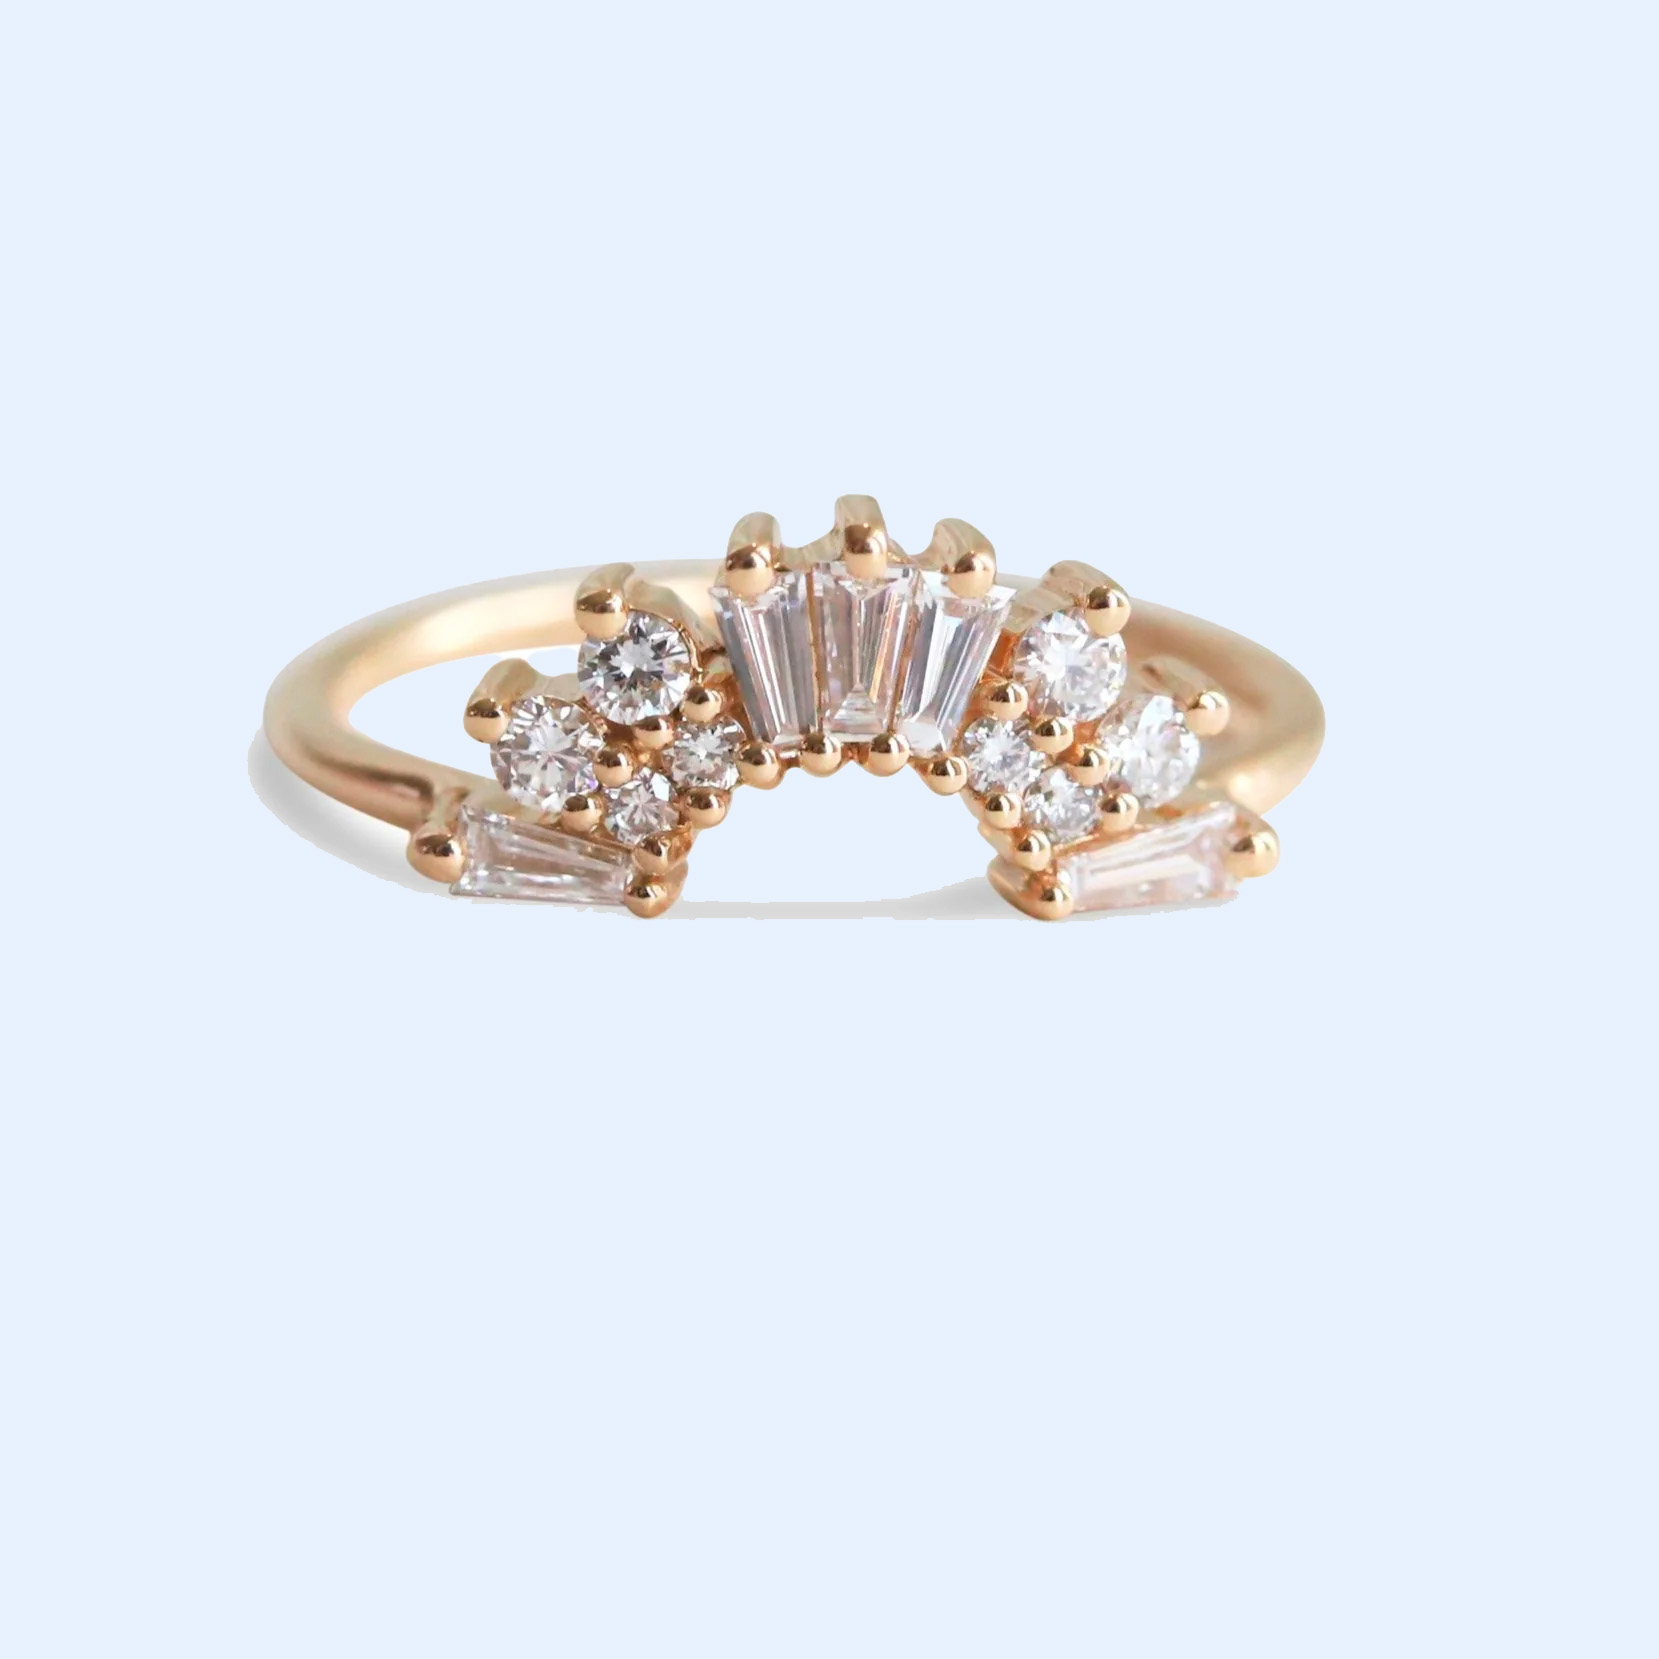 A ring from Emi Conner